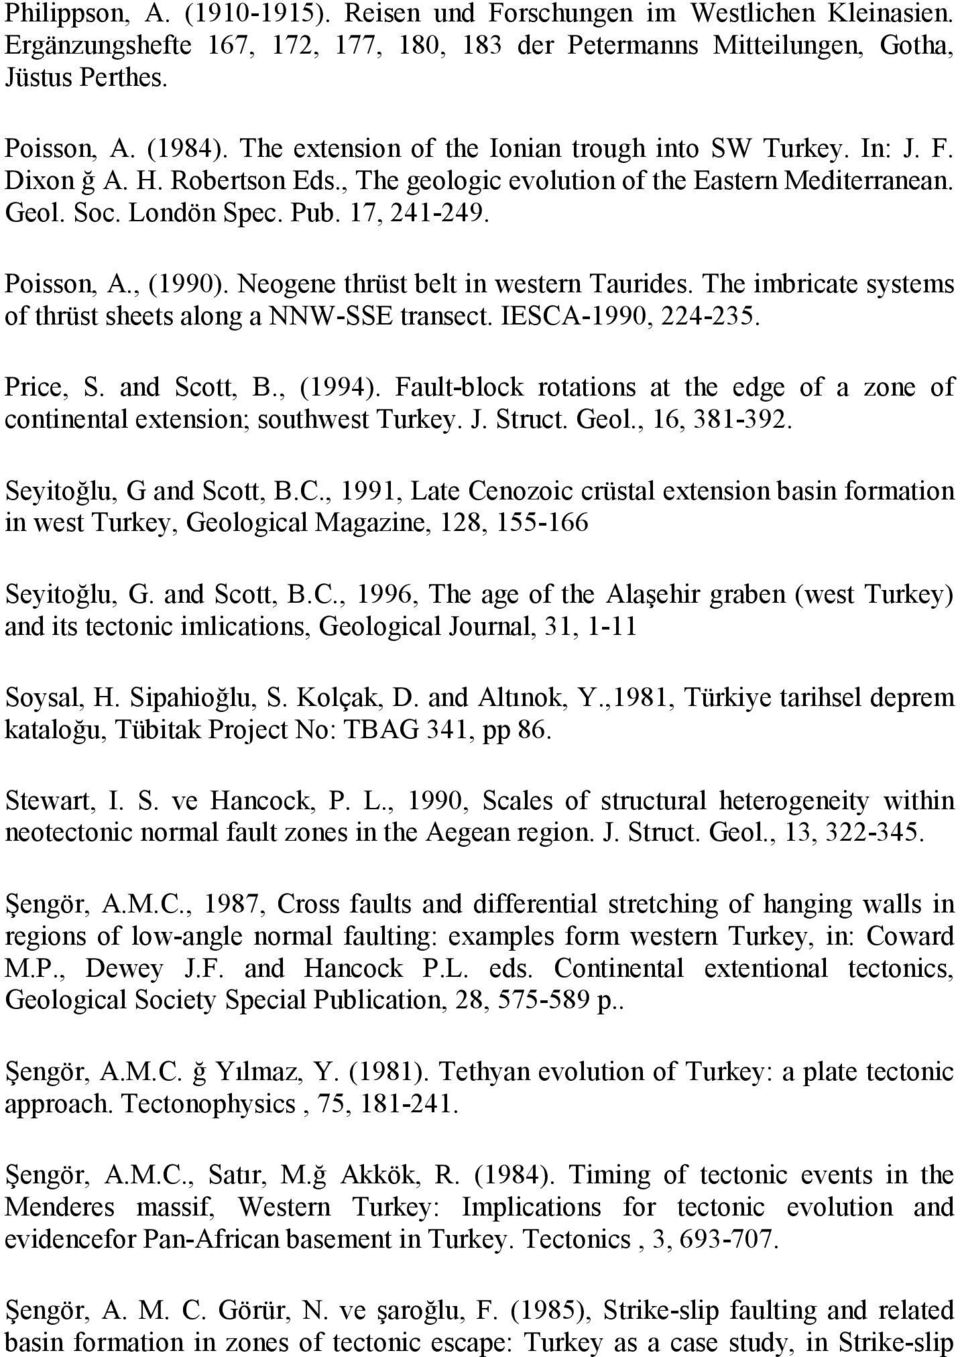 , (1990). Neogene thrüst belt in western Taurides. The imbricate systems of thrüst sheets along a NNW-SSE transect. IESCA-1990, 224-235. Price, S. and Scott, B., (1994).